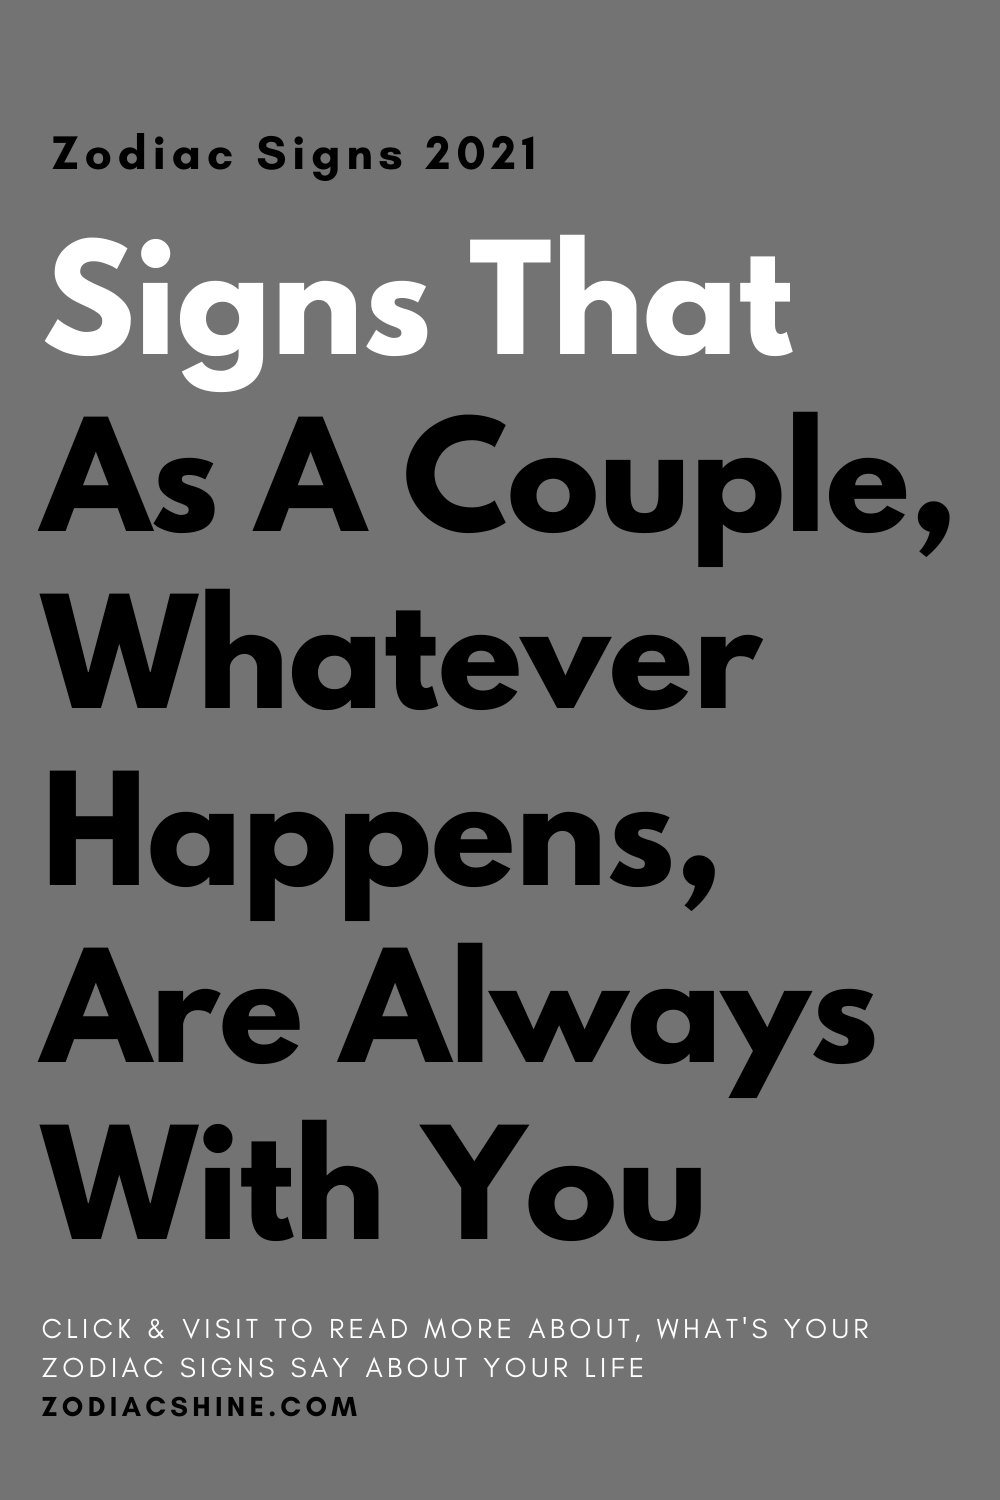 Signs That As A Couple, Whatever Happens, Are Always With You